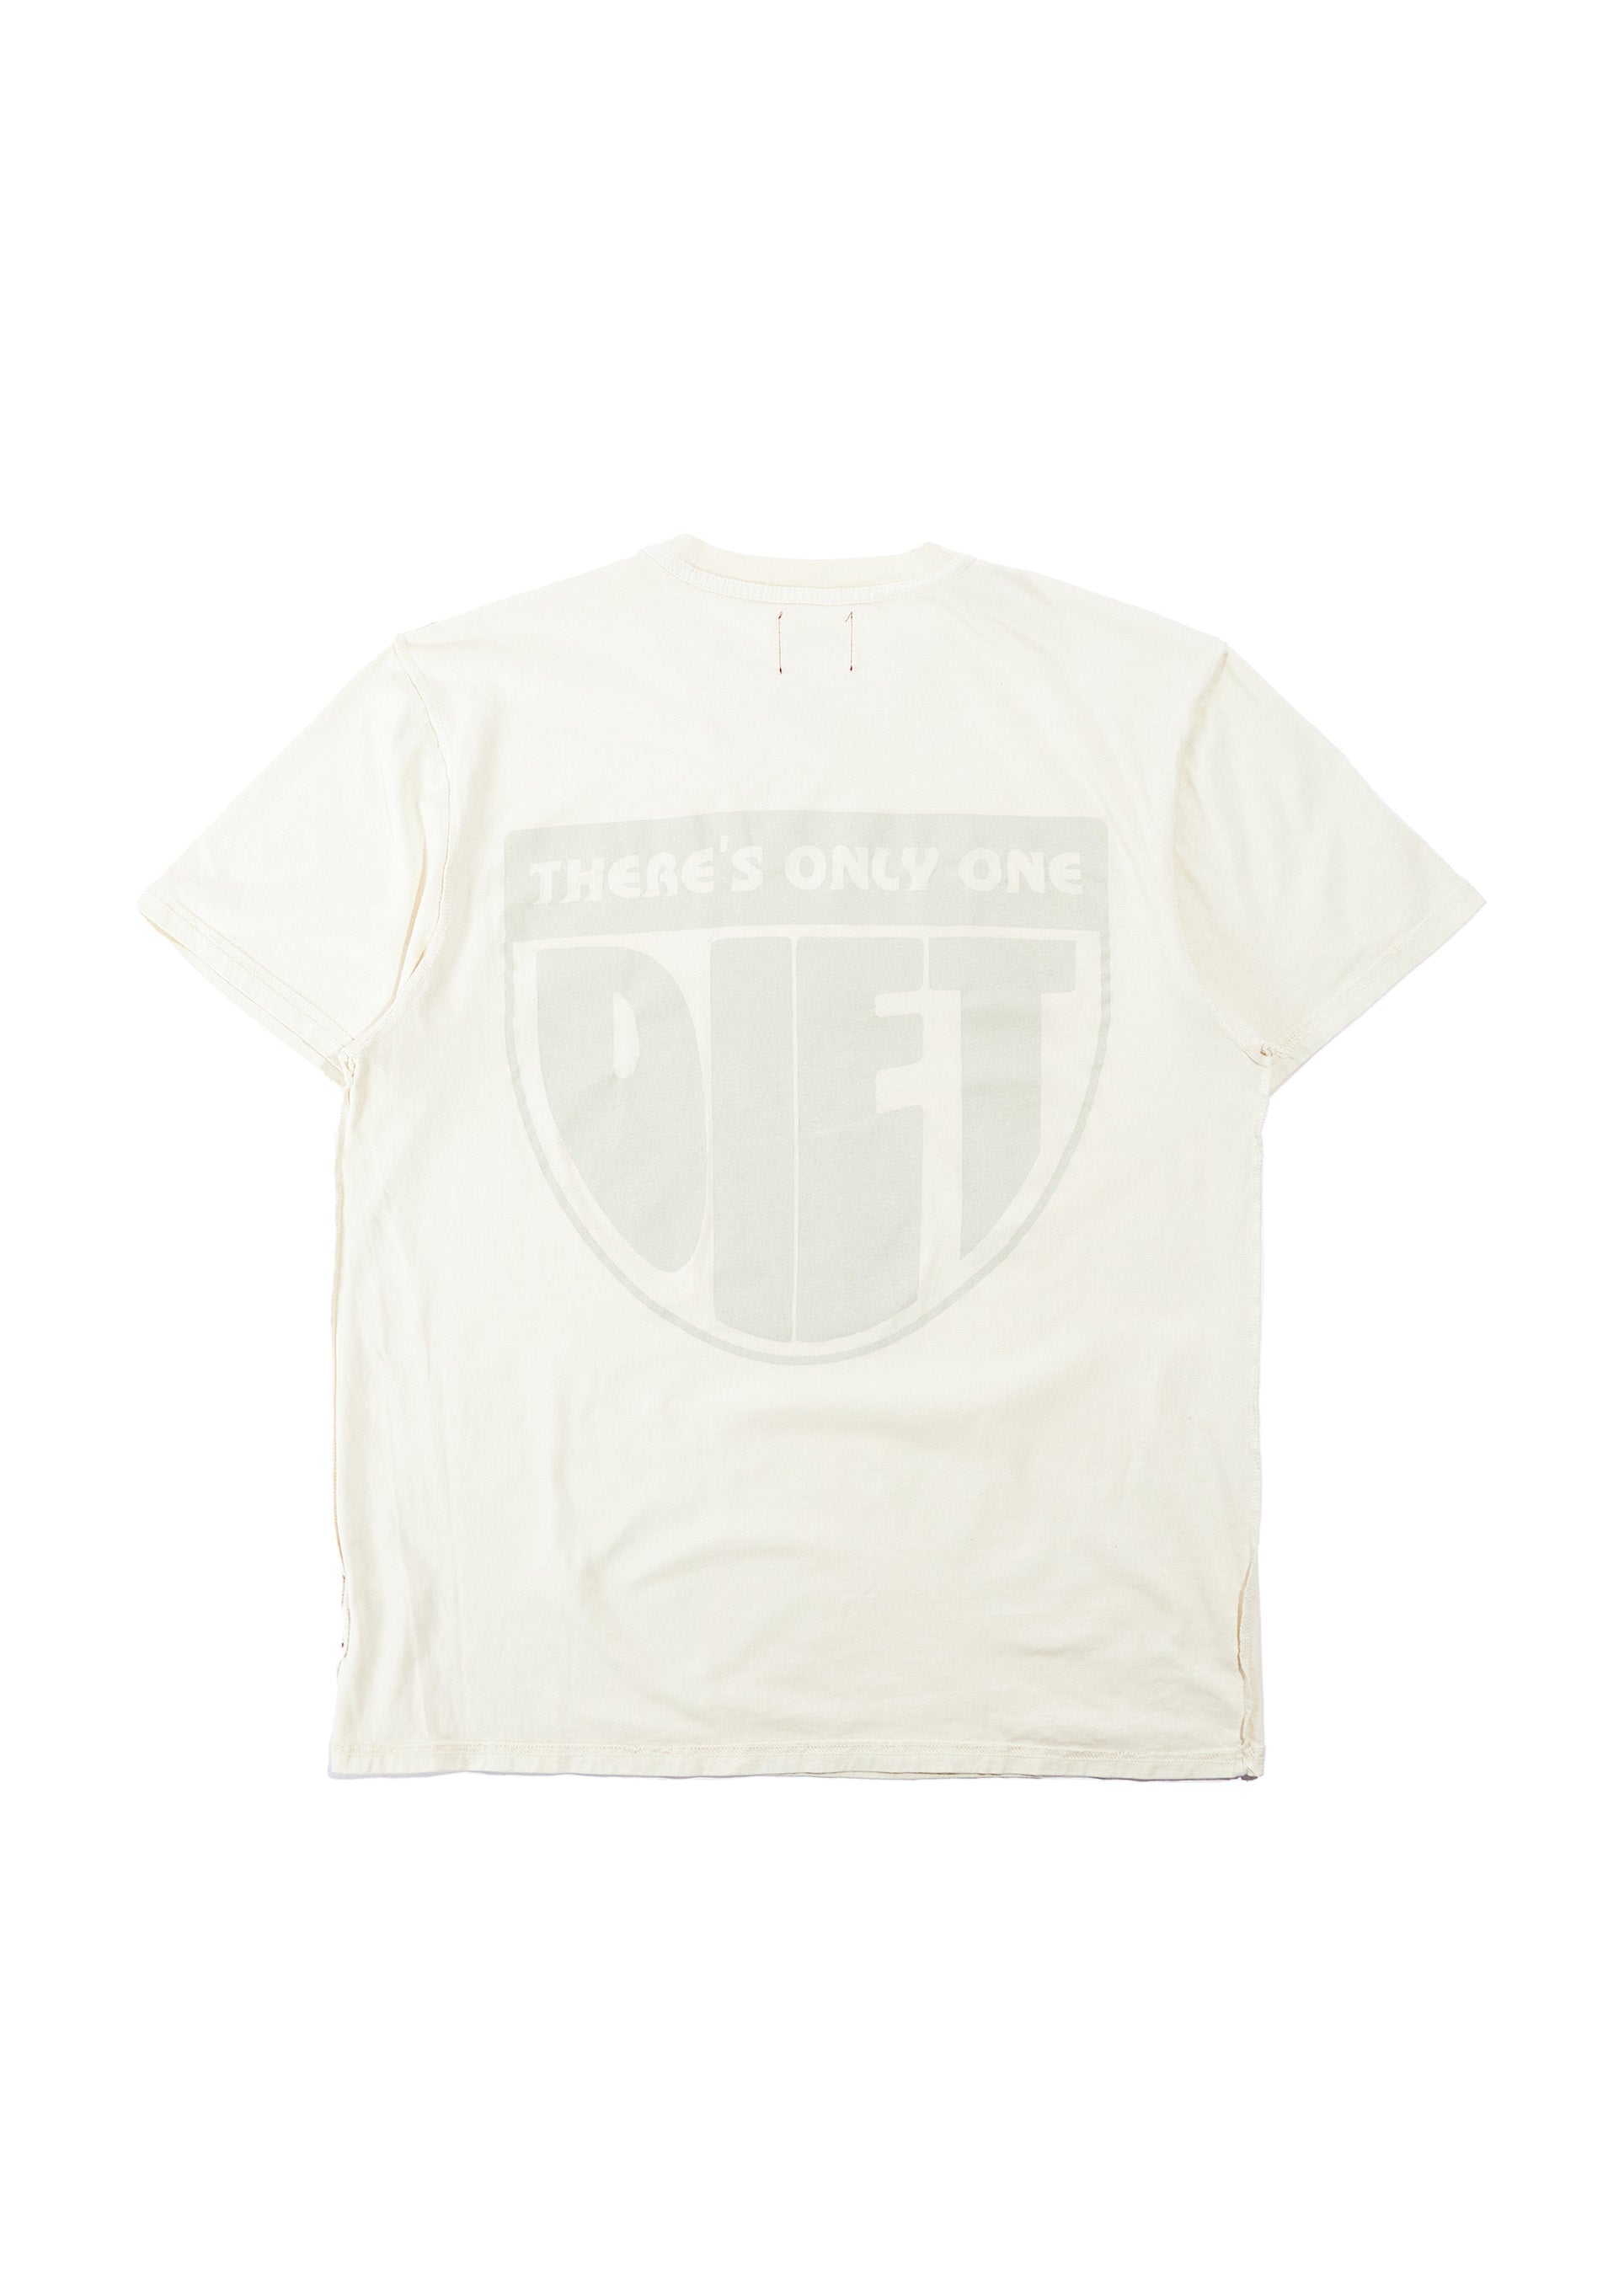 Only One Tee - Antique White